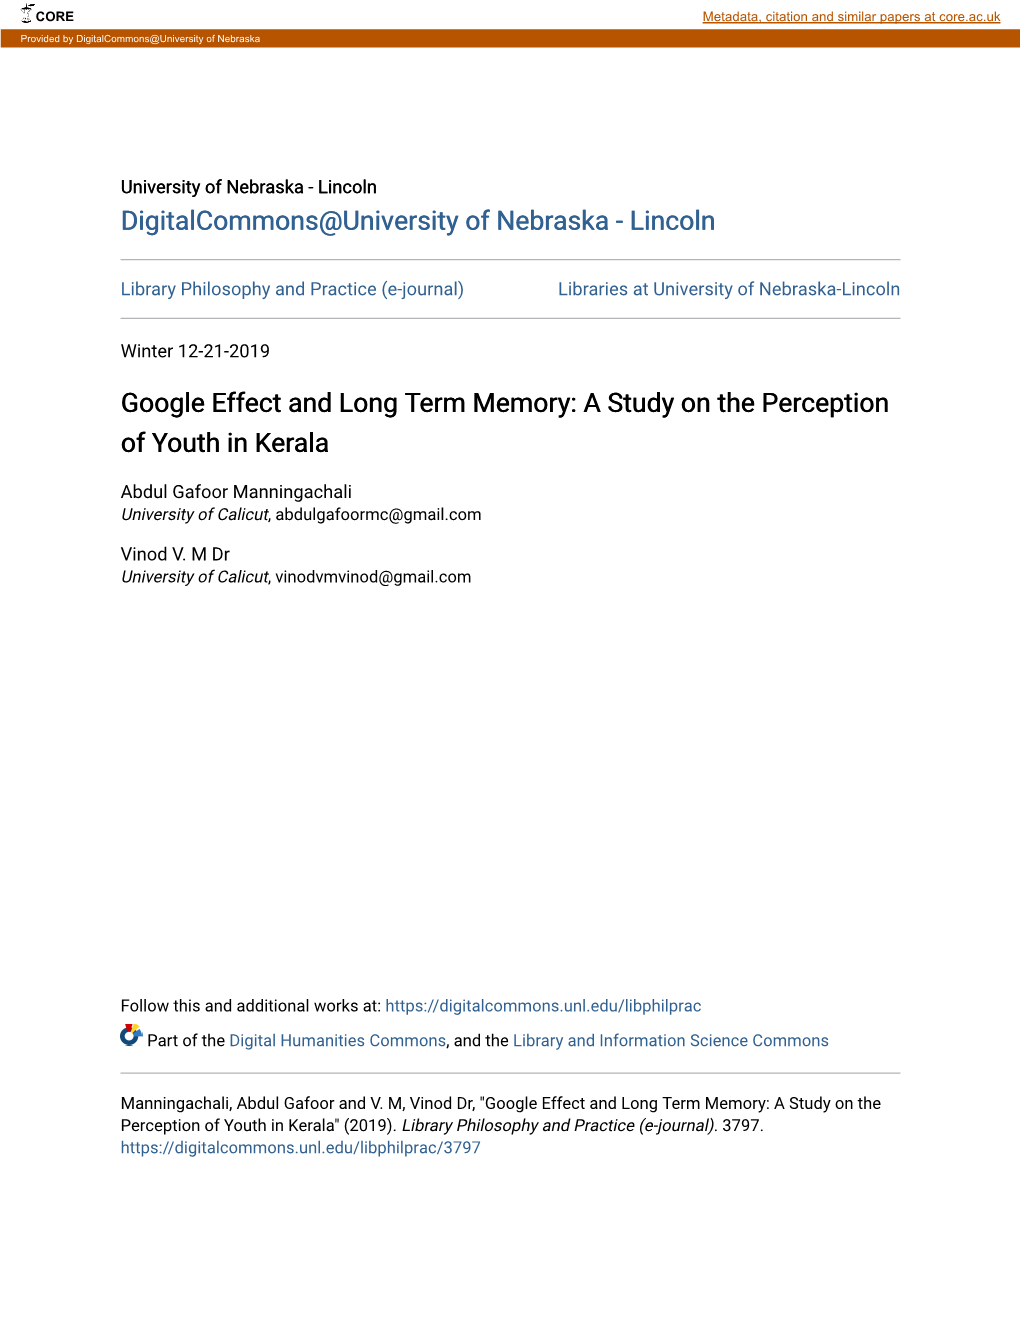 Google Effect and Long Term Memory: a Study on the Perception of Youth in Kerala